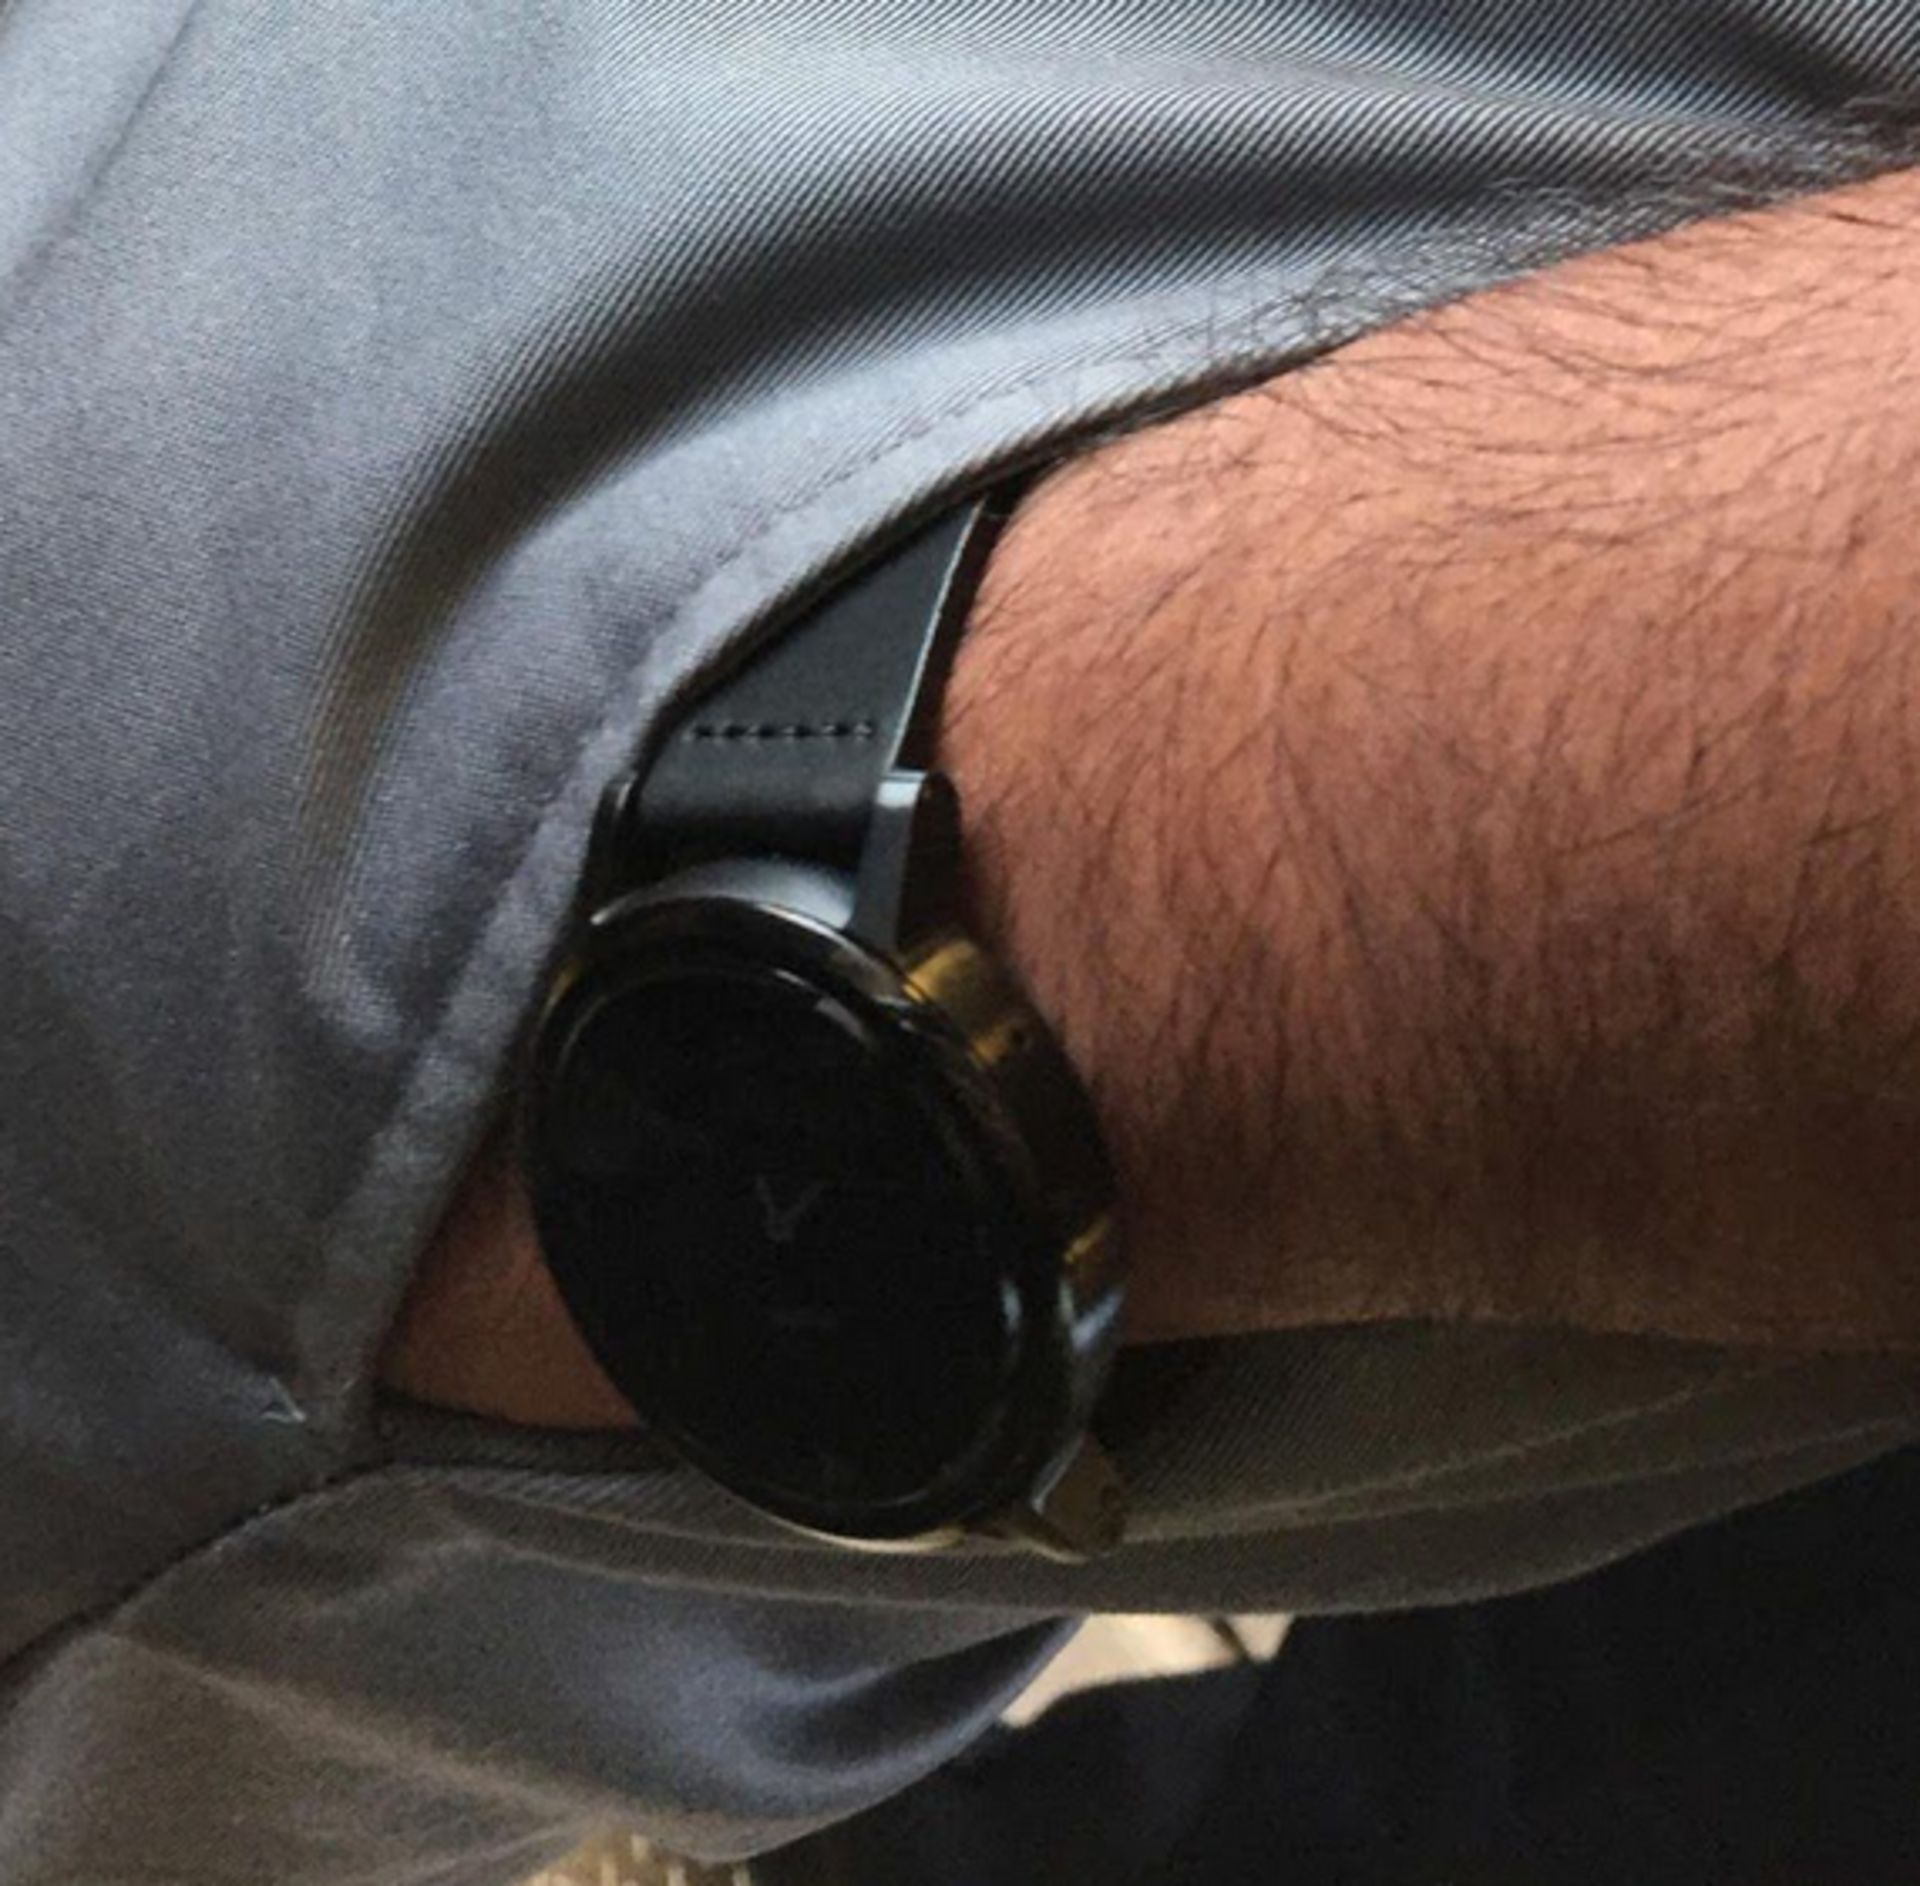 Leaked images of the Motorola Moto 360 sequel and the casing for the timepiece 6